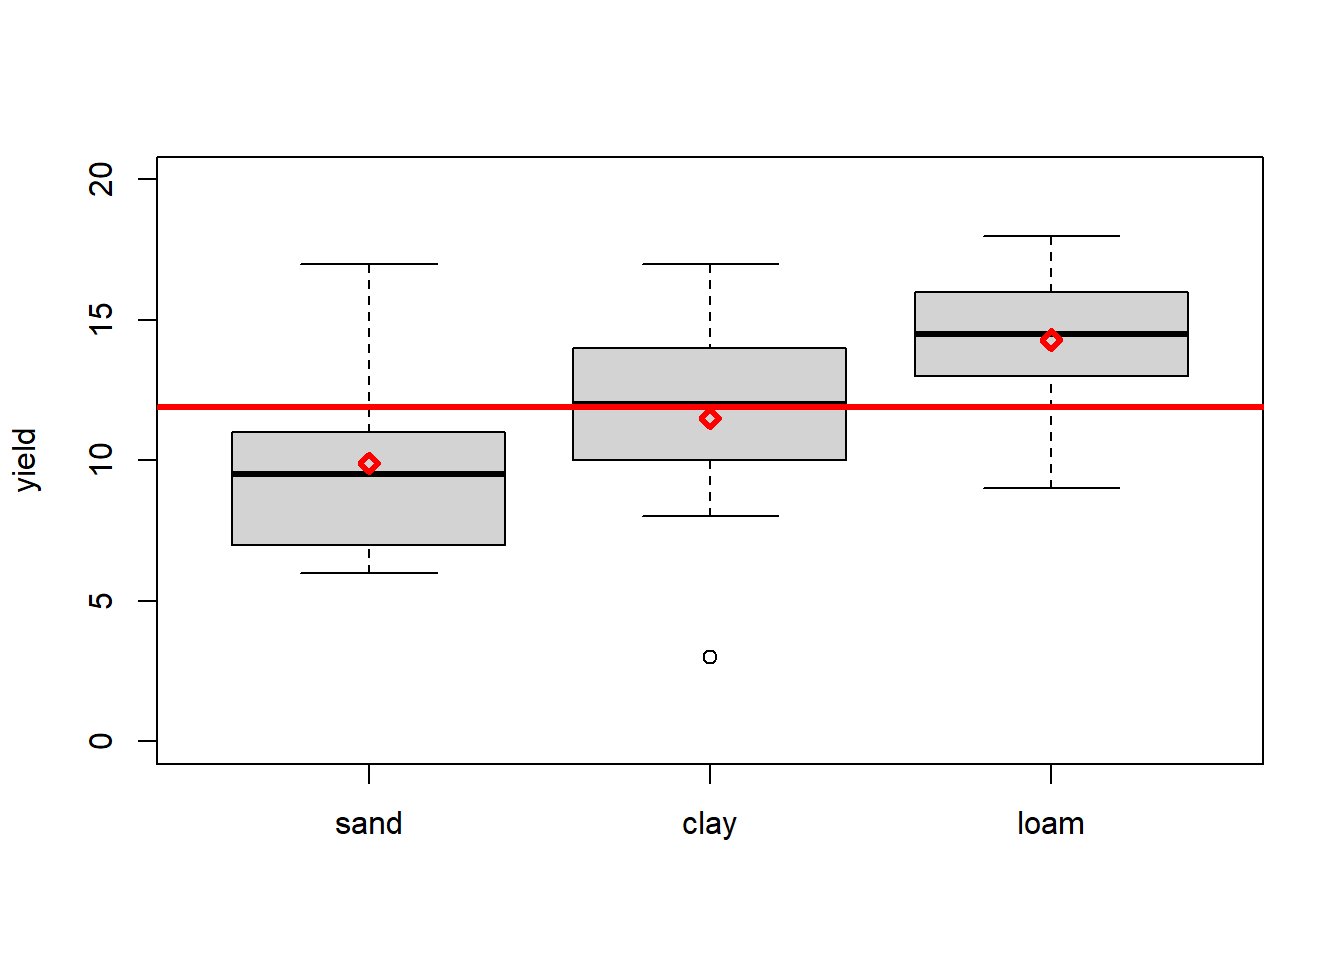 Boxplots of yield per soil type (the factor) with individual and overall means marked in red. Data from: @crawley2012